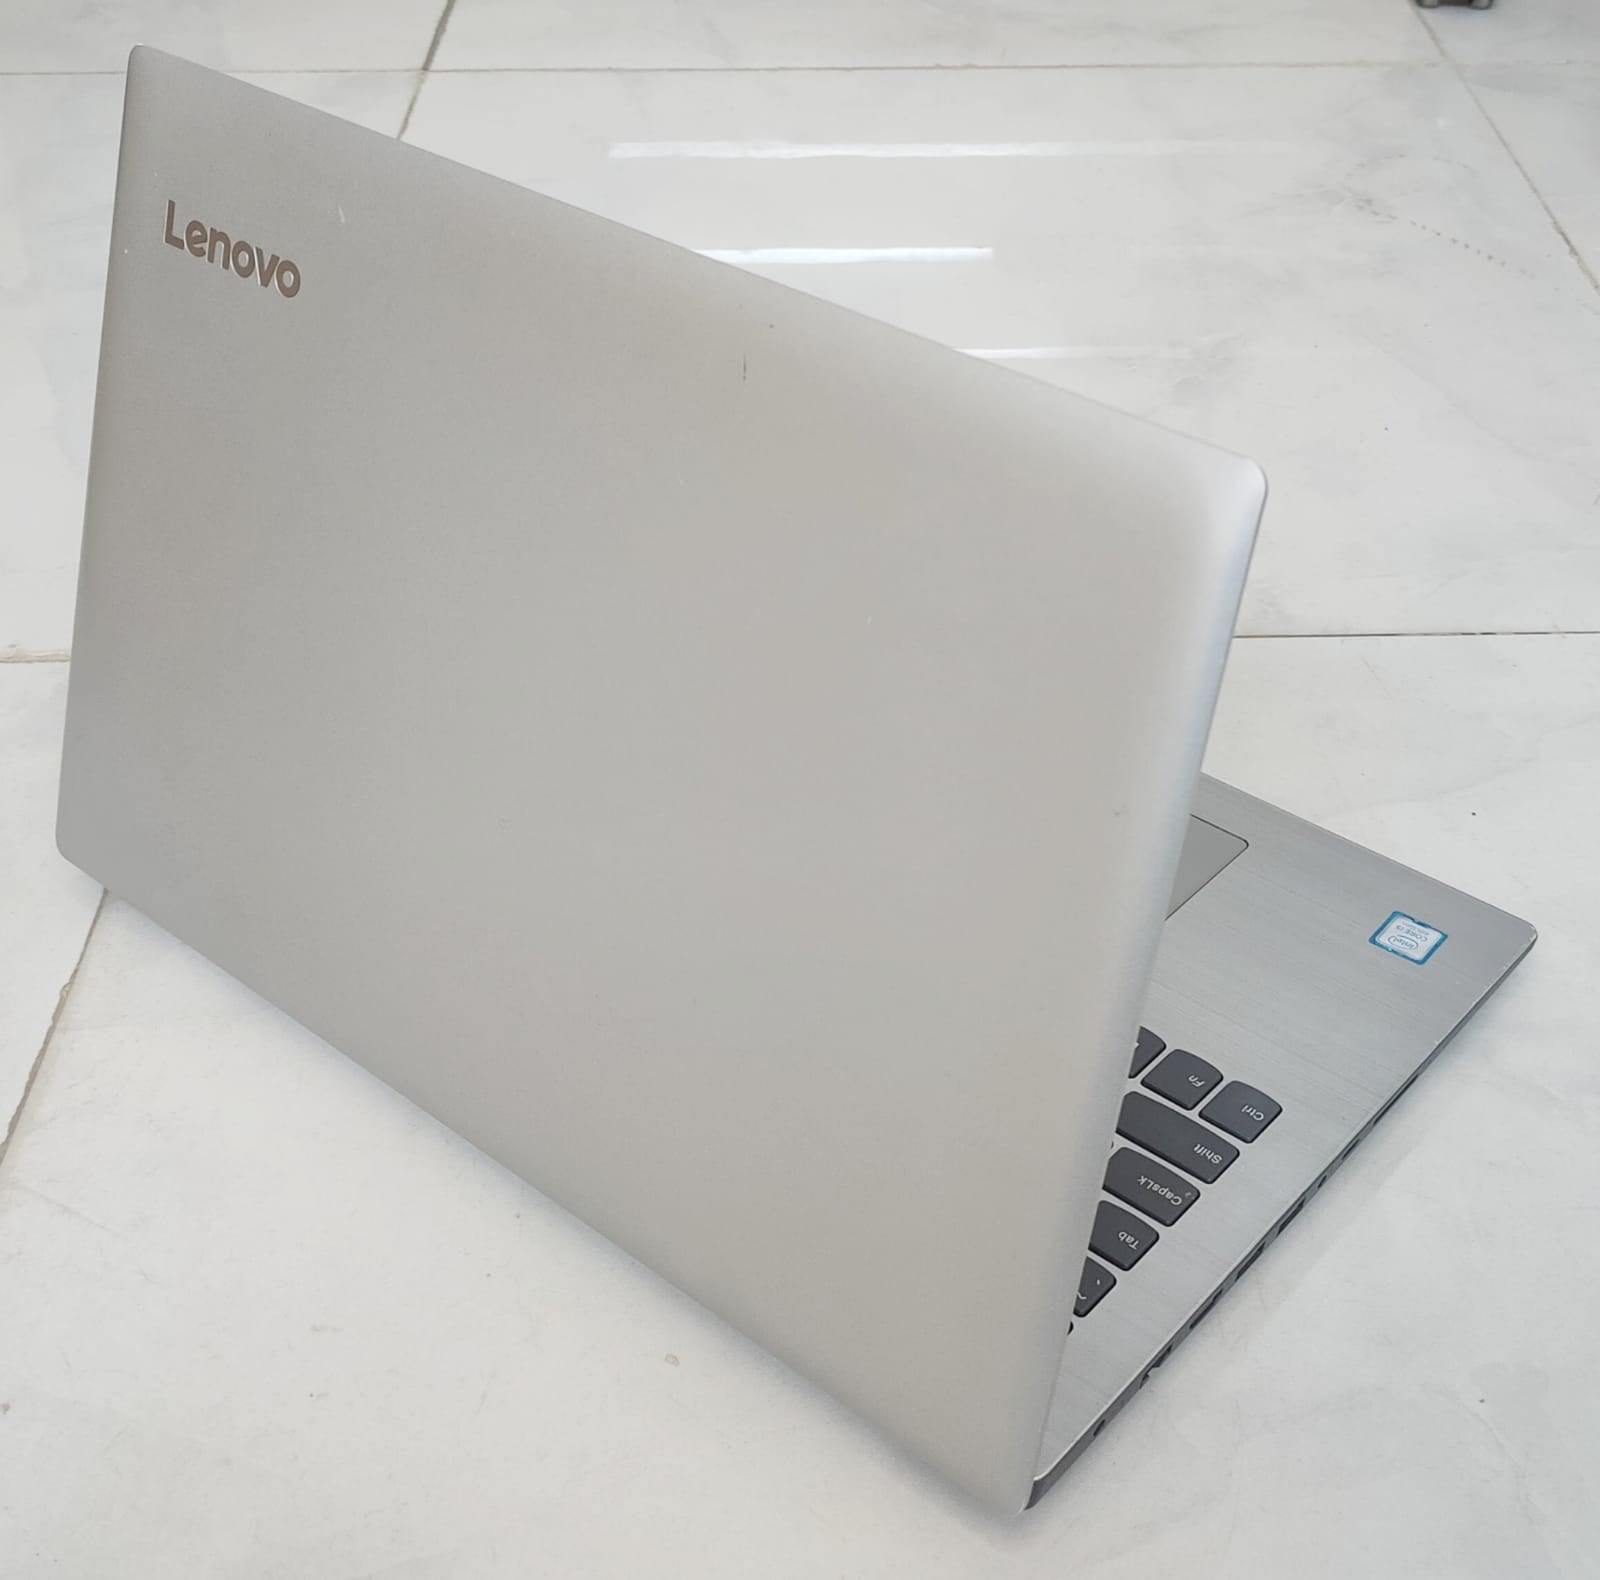 Used Lenovo Premium Condition High Config Touch Screen With SSD High Speed Laptop